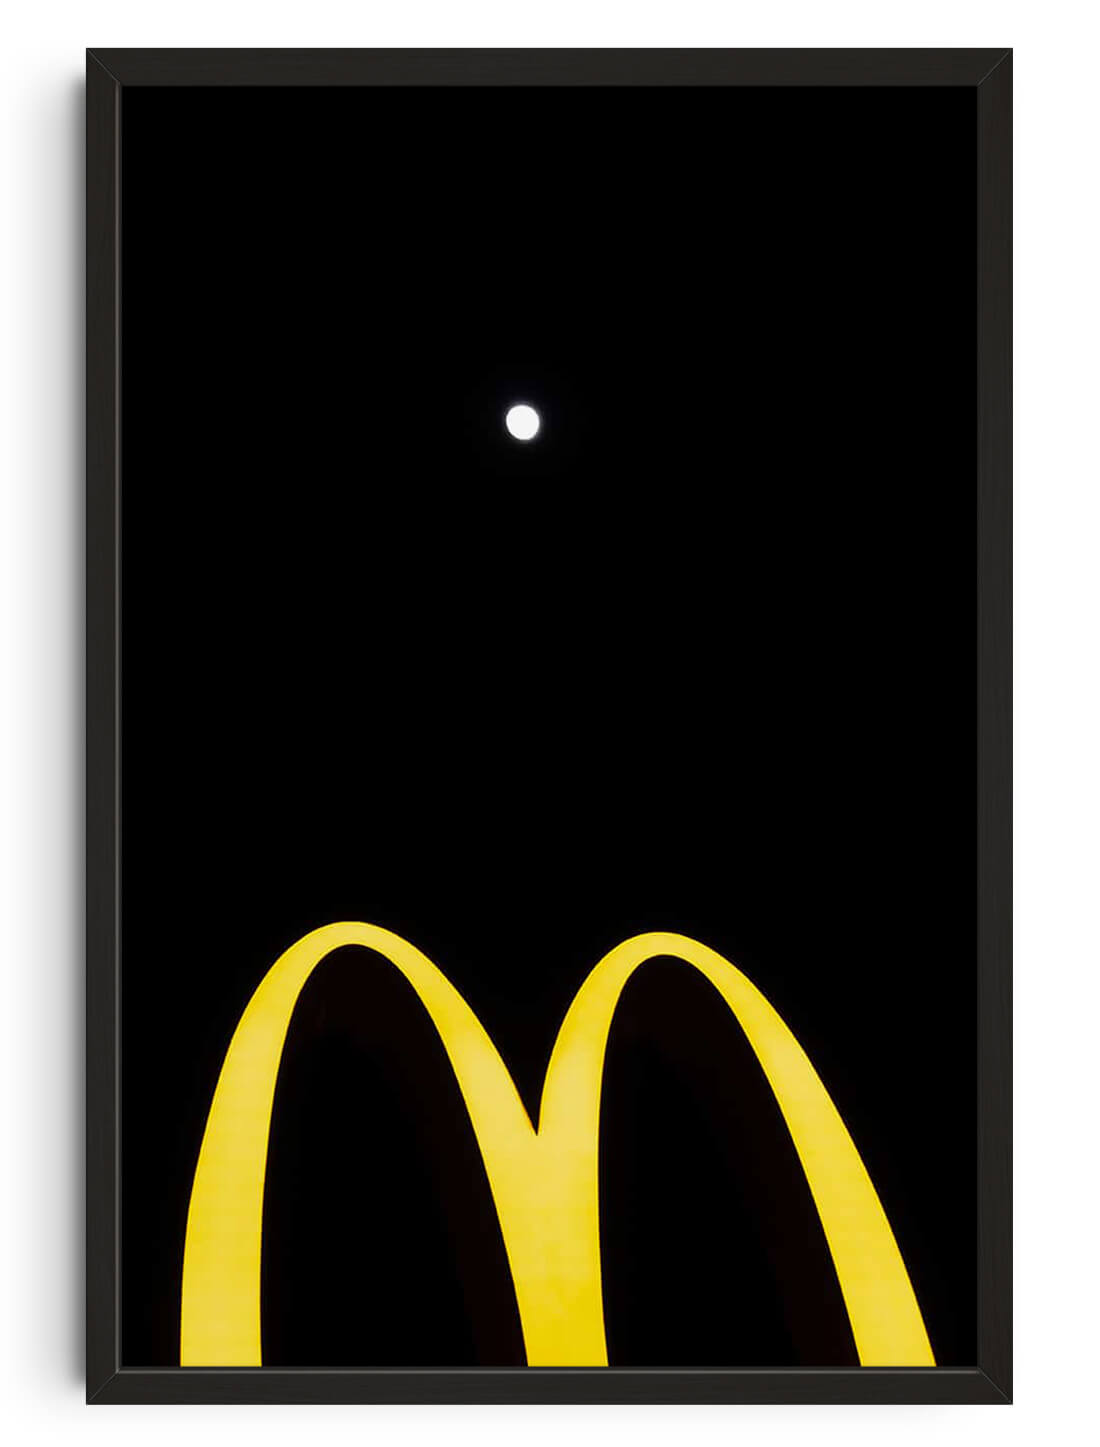 M for Moon contemporary wall art print by Eve Lee - sold by DROOL